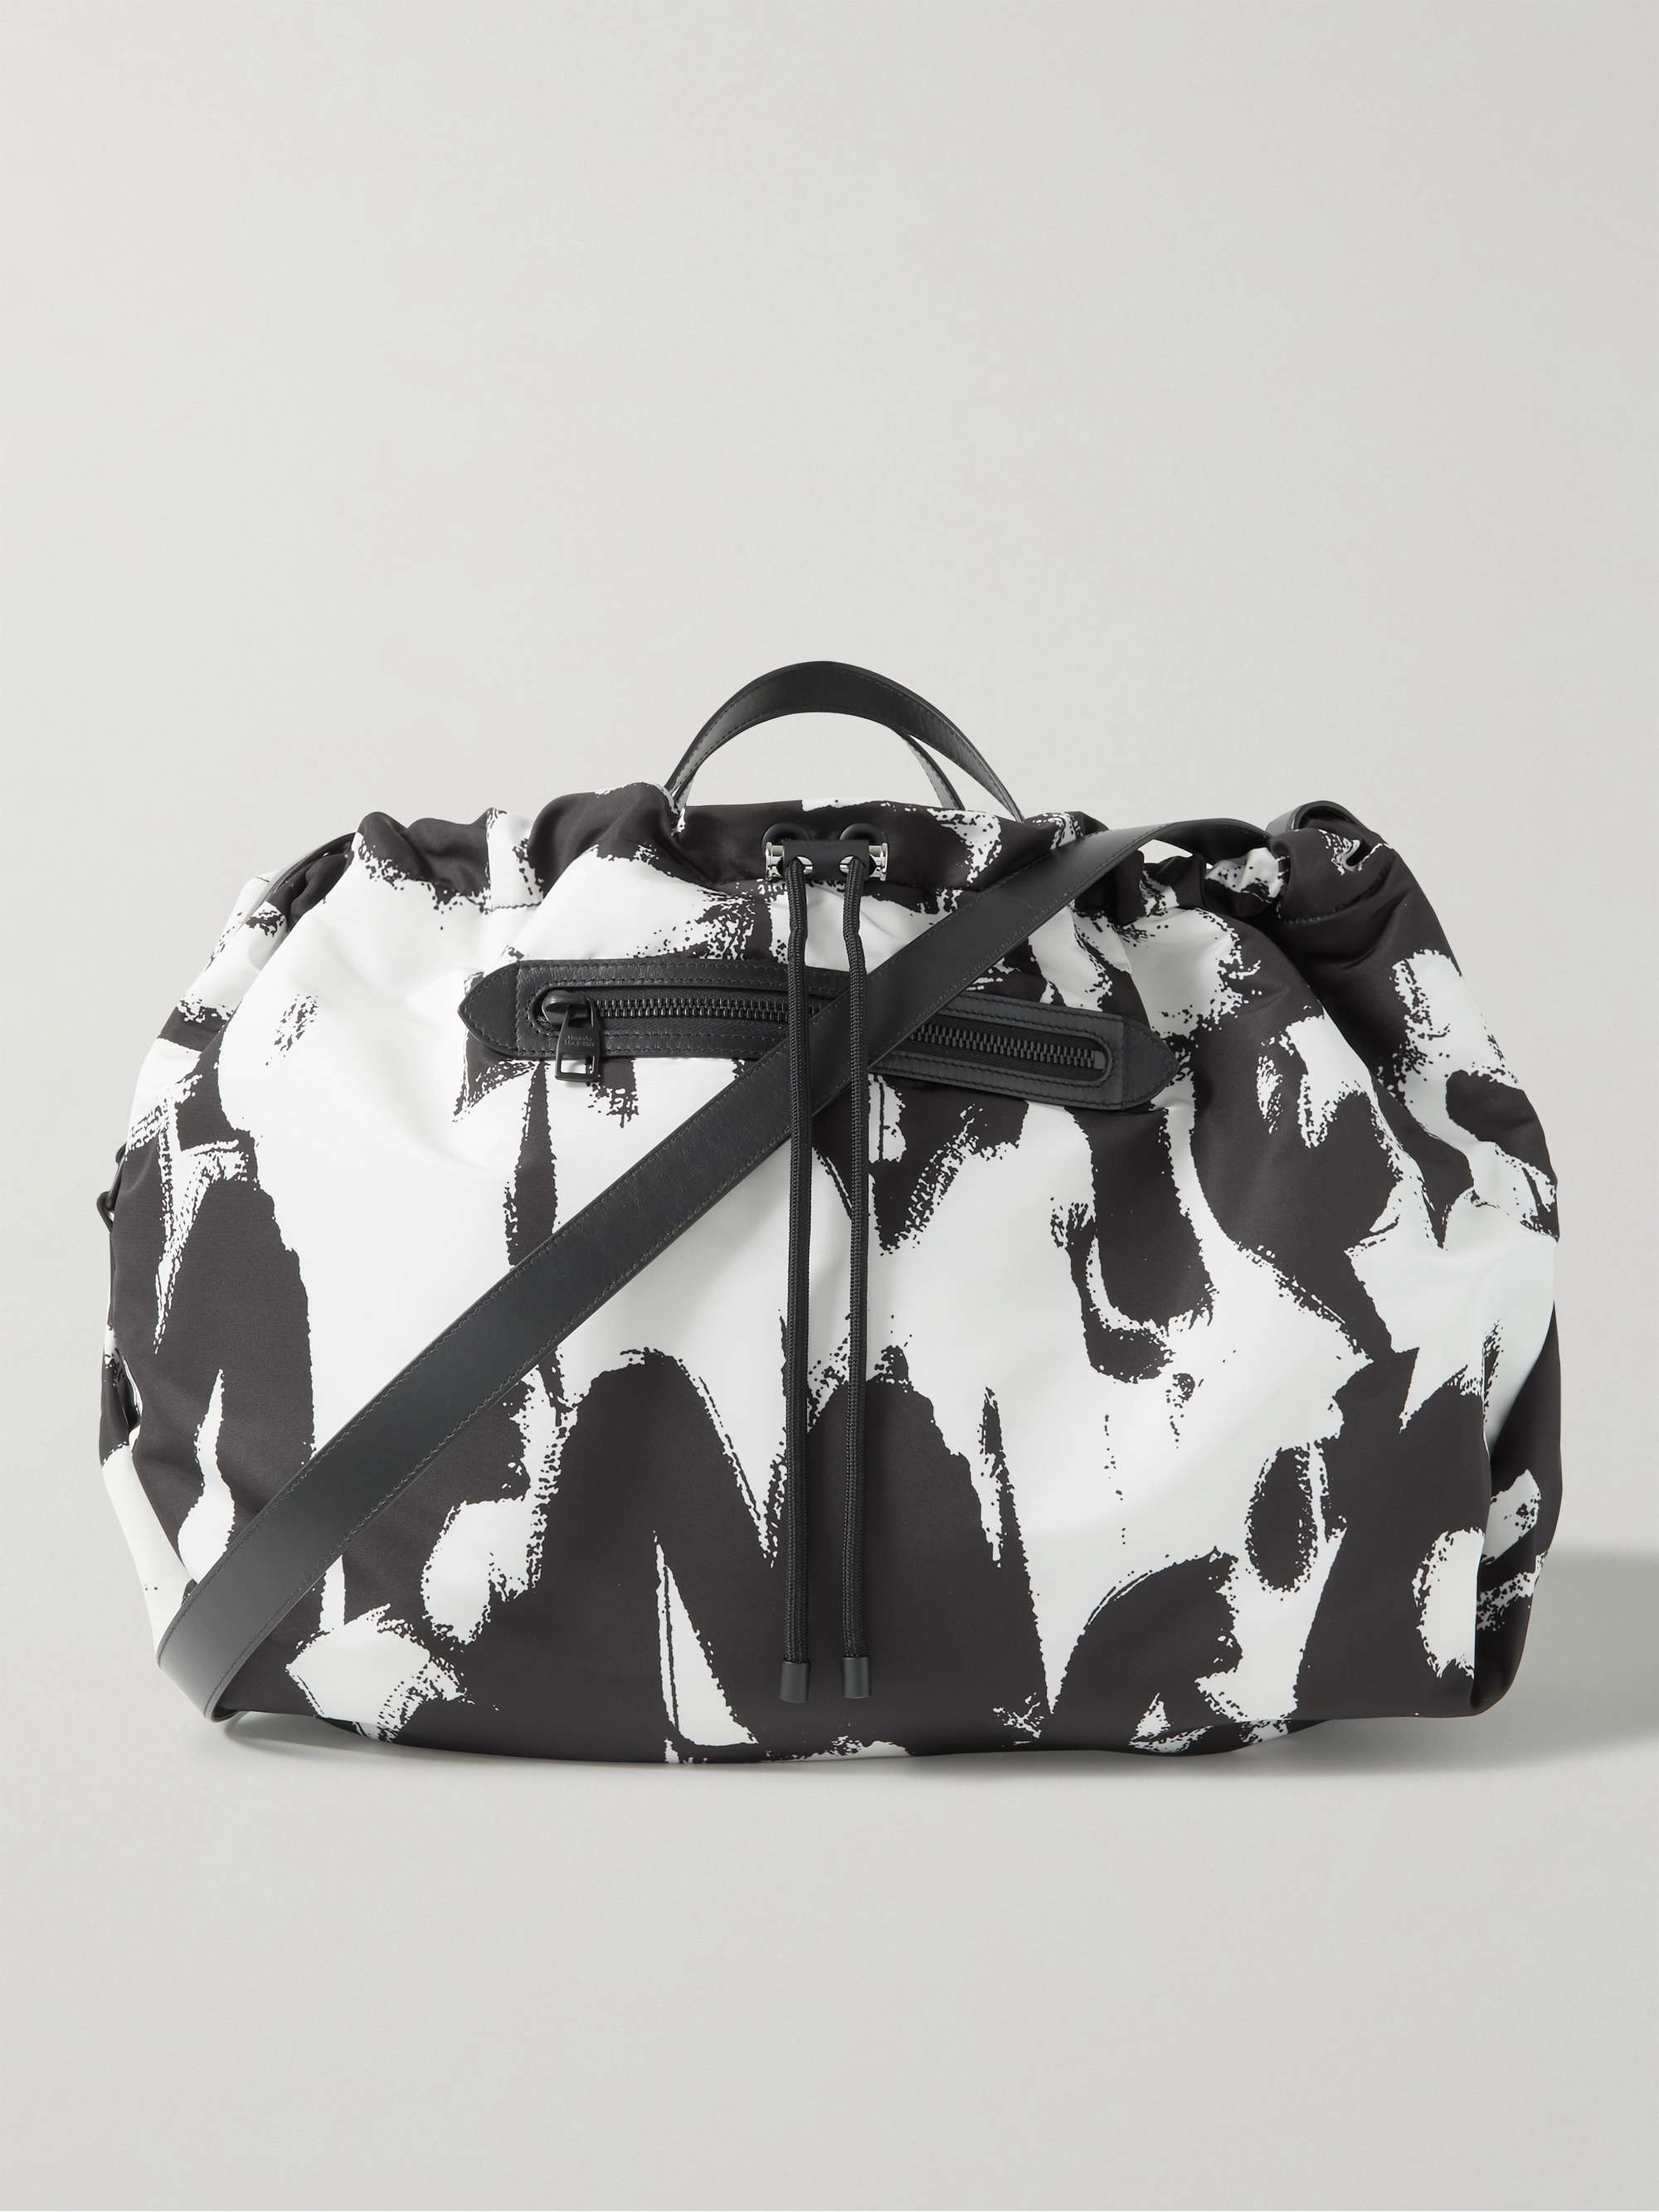 ALEXANDER MCQUEEN Leather-Trimmed Logo-Print Satin Tote Bag